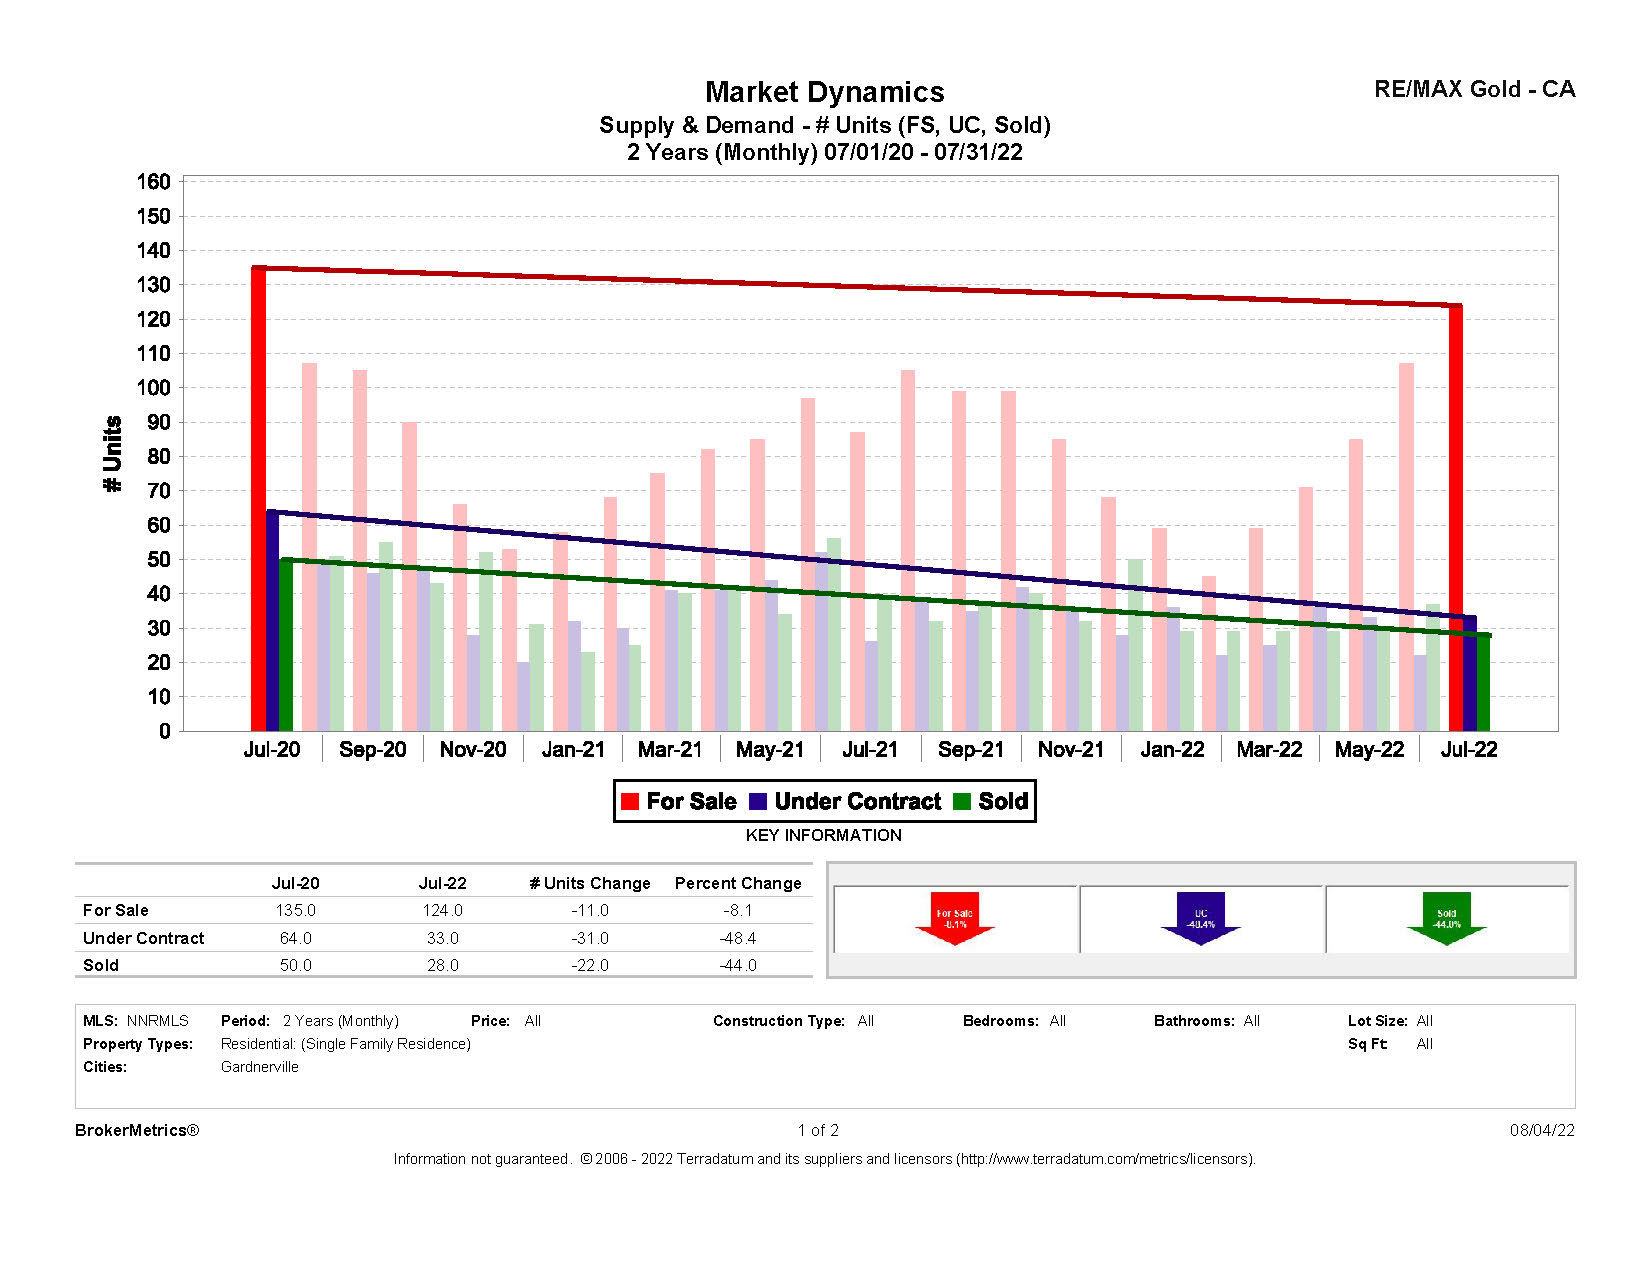 July 2022 Residential Stats: Supply & Demand graph for Gardnerville, NV